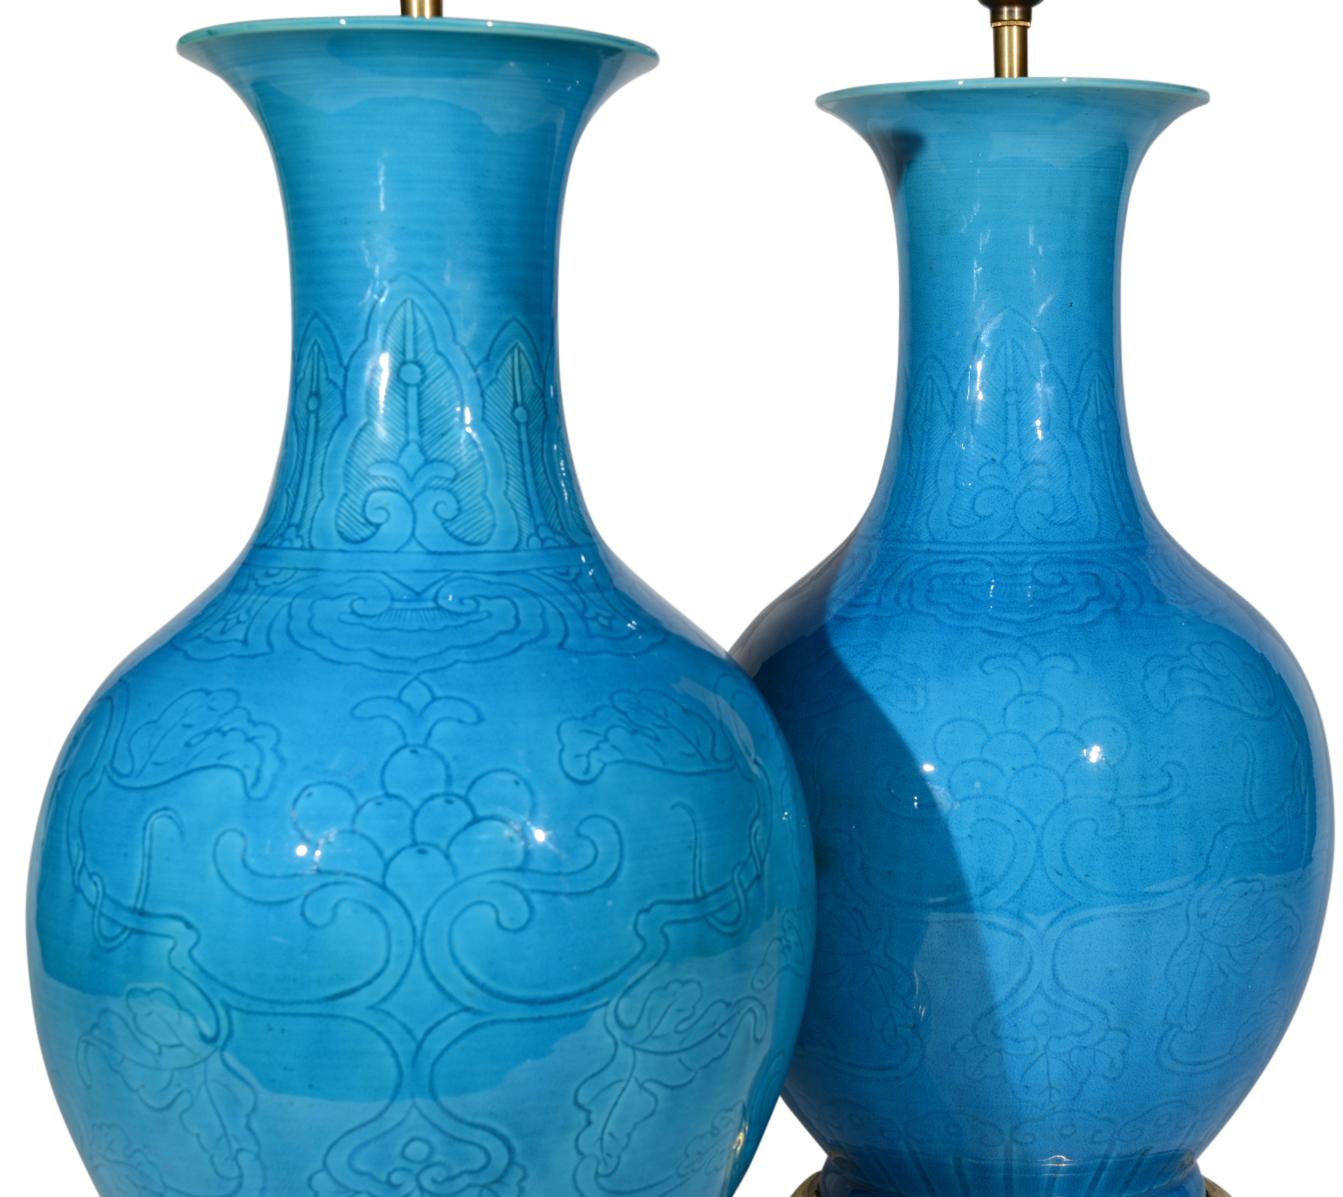 A very fine pair of late 19th century Chinese turquoise glazed baluster vases, each with narrow flared necks and incised with stylised lotus and foliate decoration, now mounted as table lamps with hand gilded turned bases.

Height of vases: 16 1/2